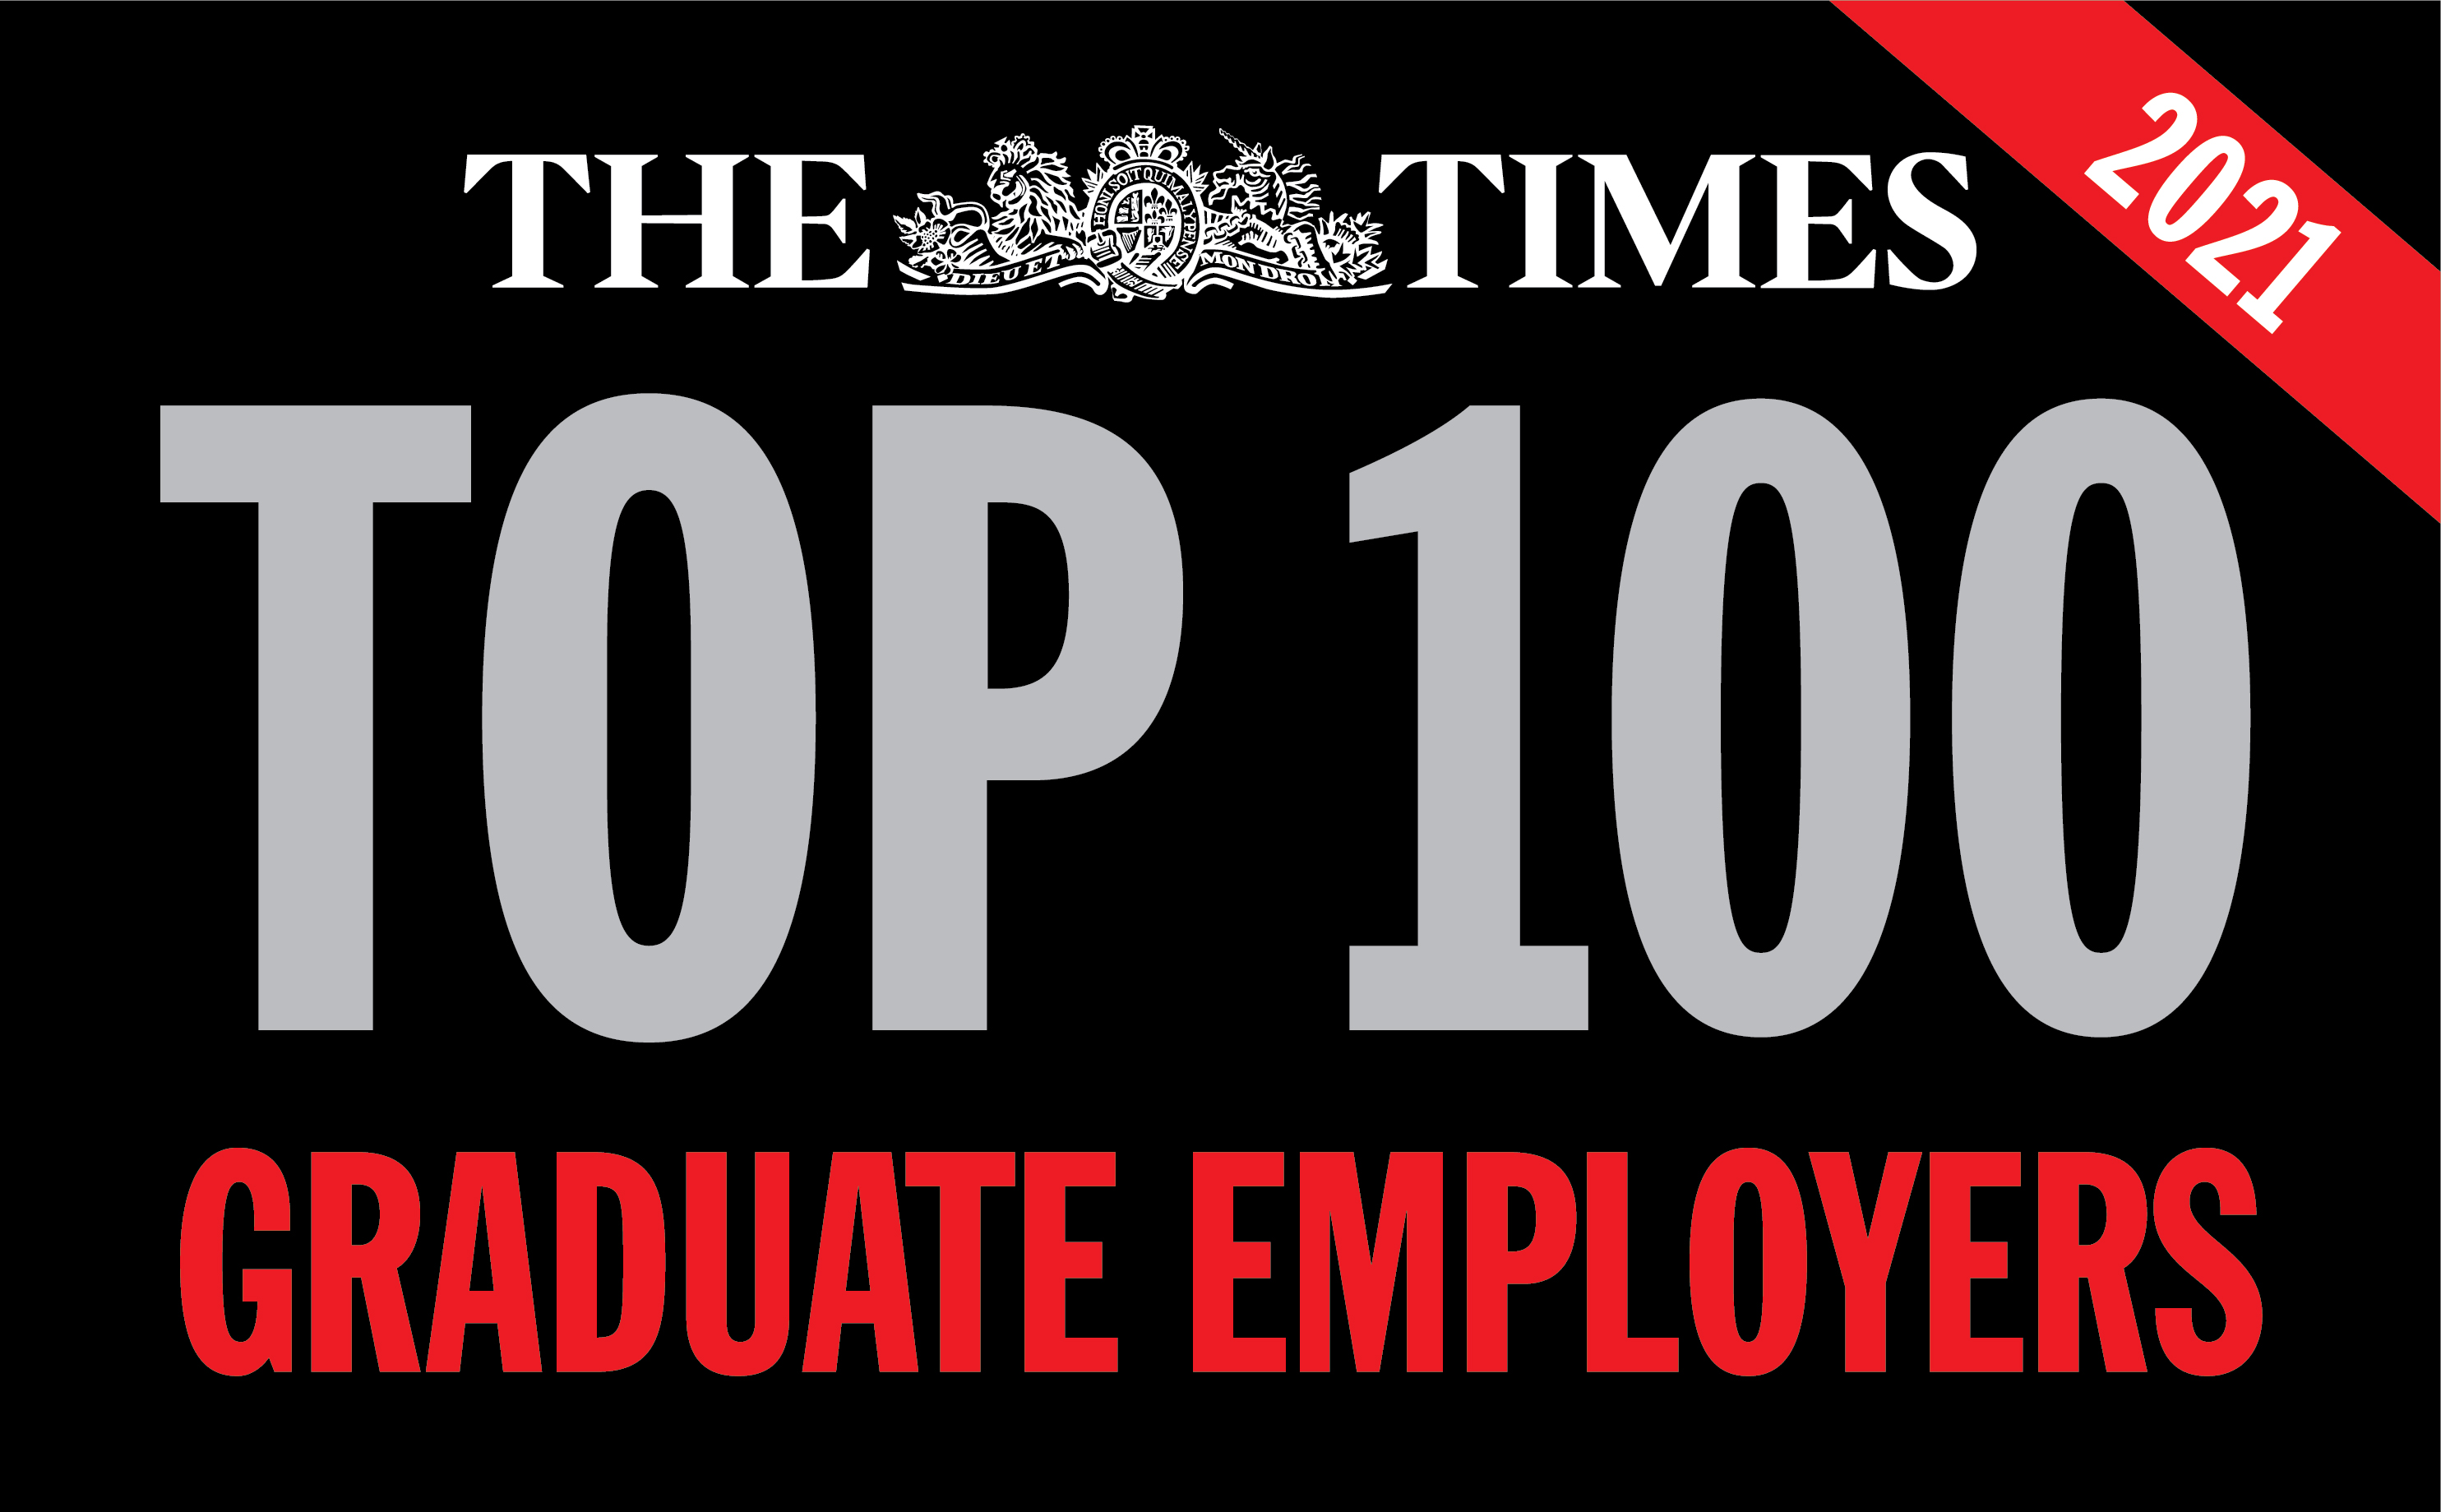 The Times Top 100 Graduate Employers